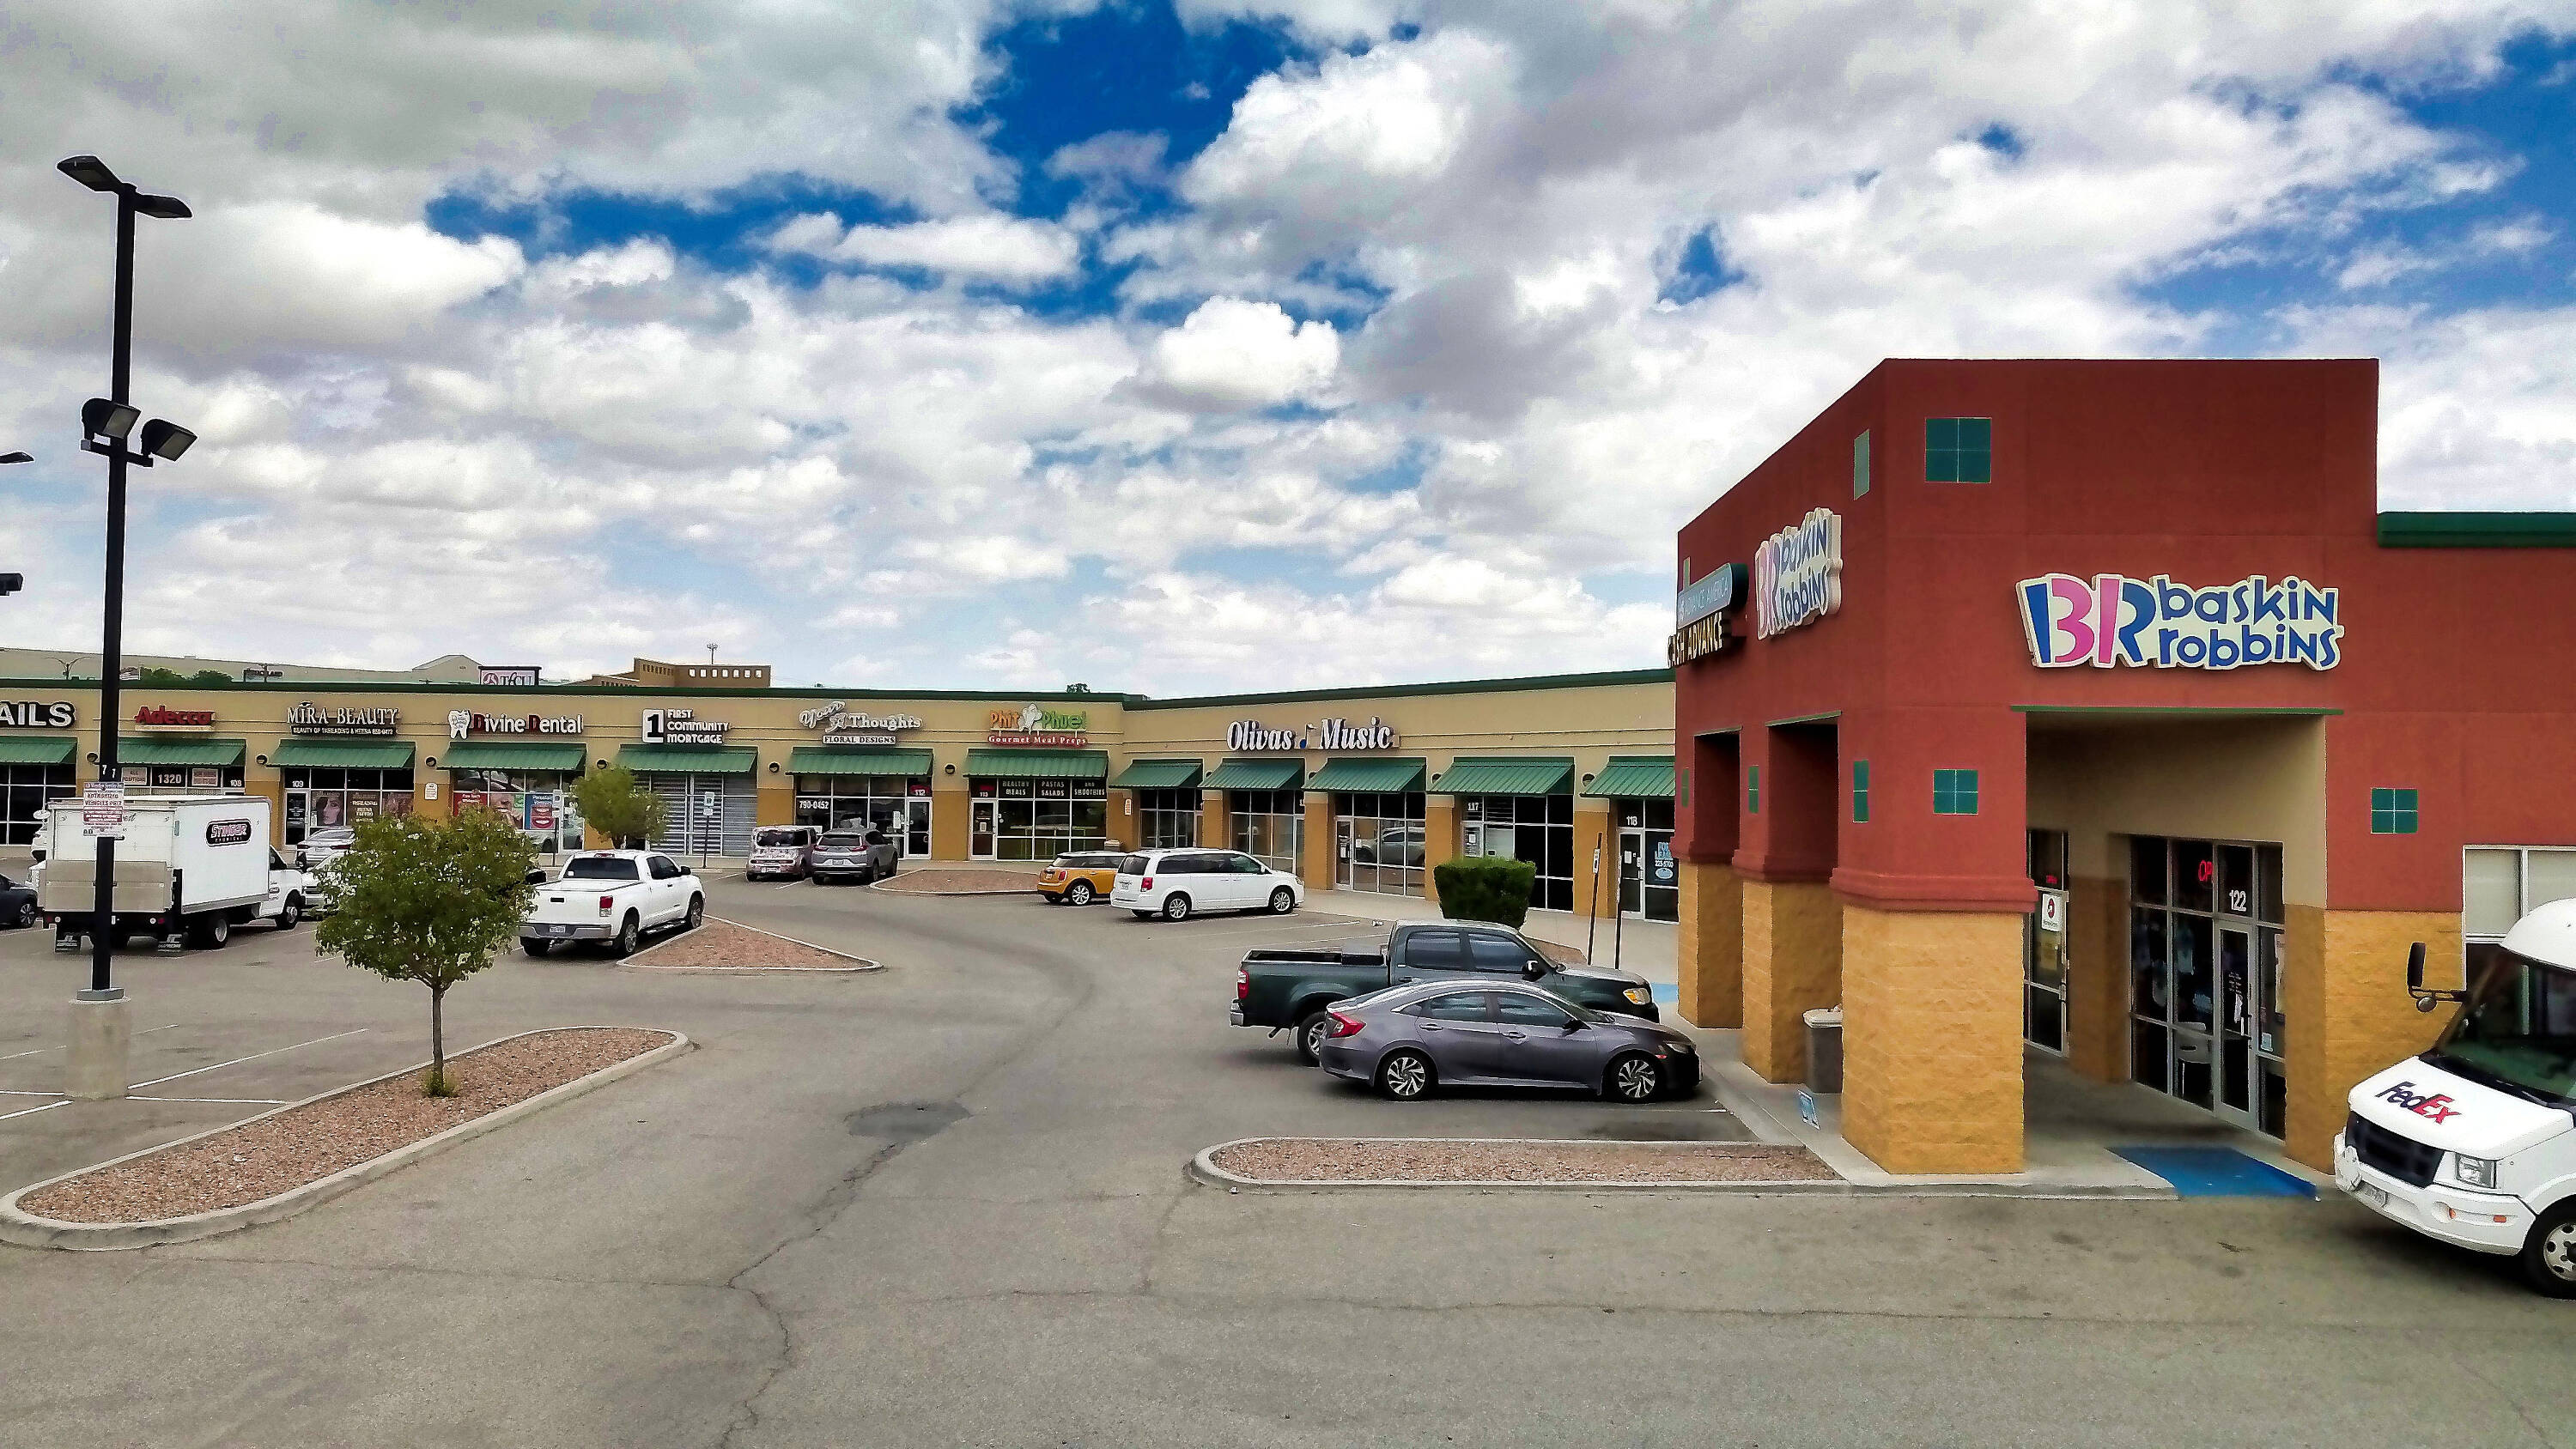 Lease Commercial Real Estate And Property In Estrella, 40% OFF